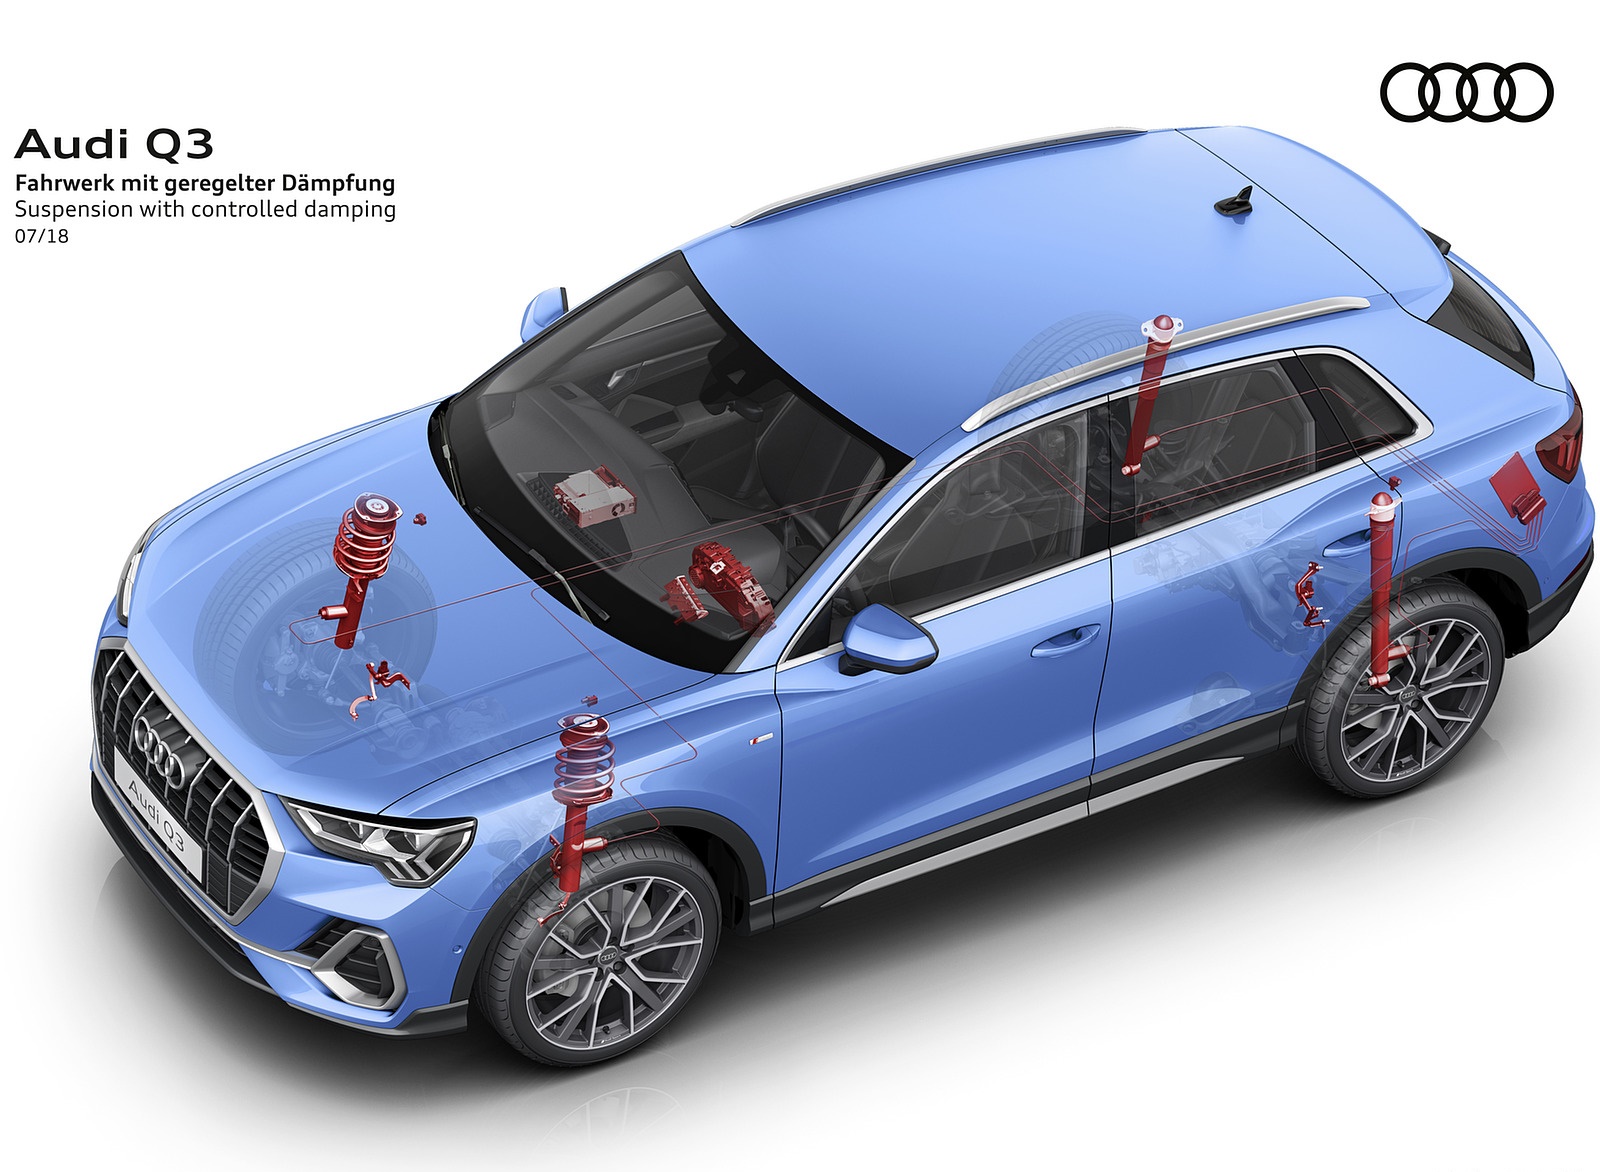 2019 Audi Q3 Suspension with controlled damping Wallpapers #26 of 40